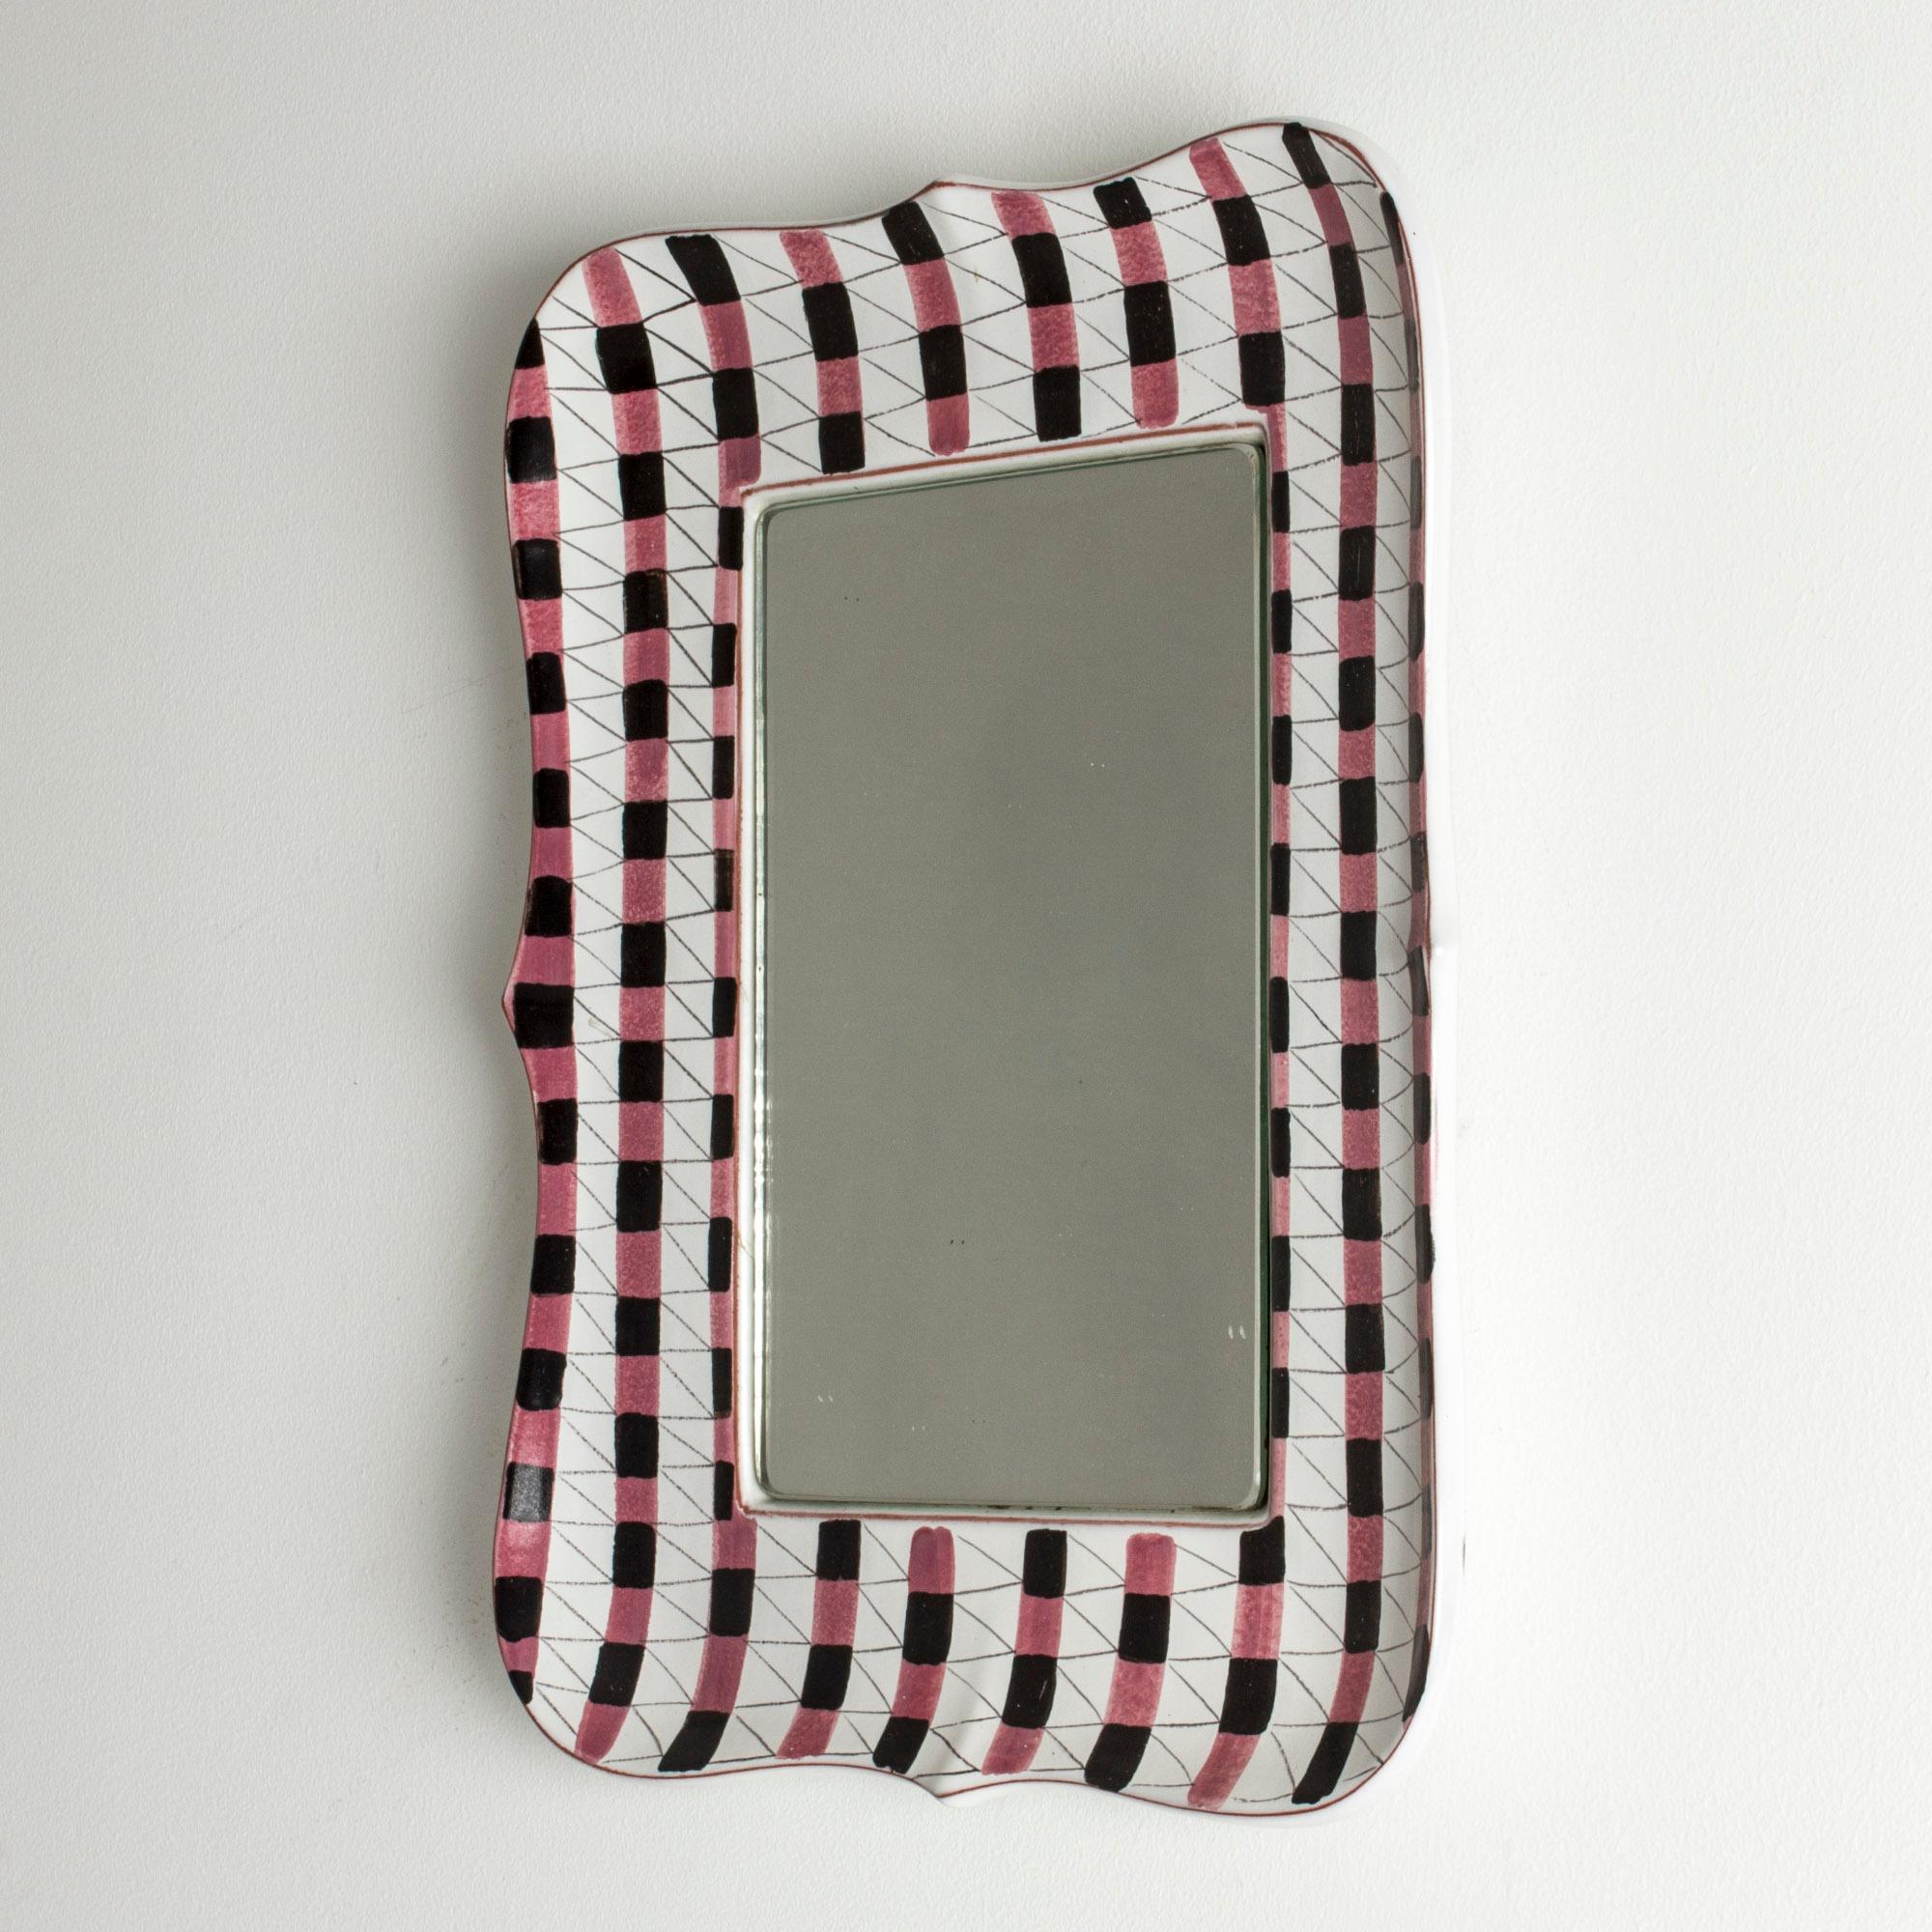 Faience wall mirror by Stig Lindberg with a beautiful, vivacious checkered decor with pink and black stripes.